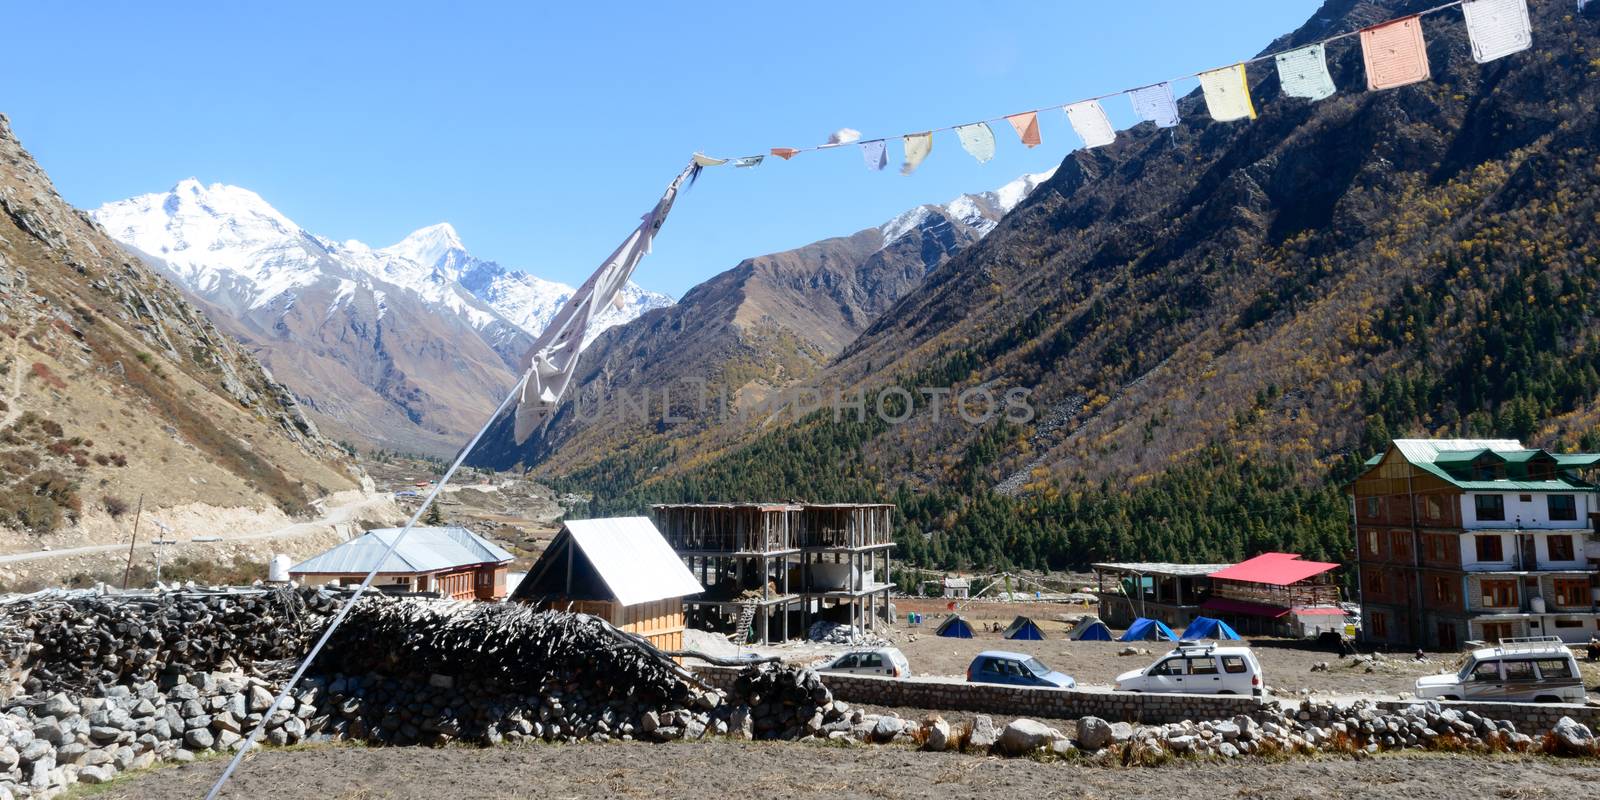 Chitkul india May 2019 - Scenic view of India’s last village. Whole terrain is surrounded by Himalayan Kailash mountain range, apple orchards, wooden houses, army ITBP barracks and Ranikanda meadows.